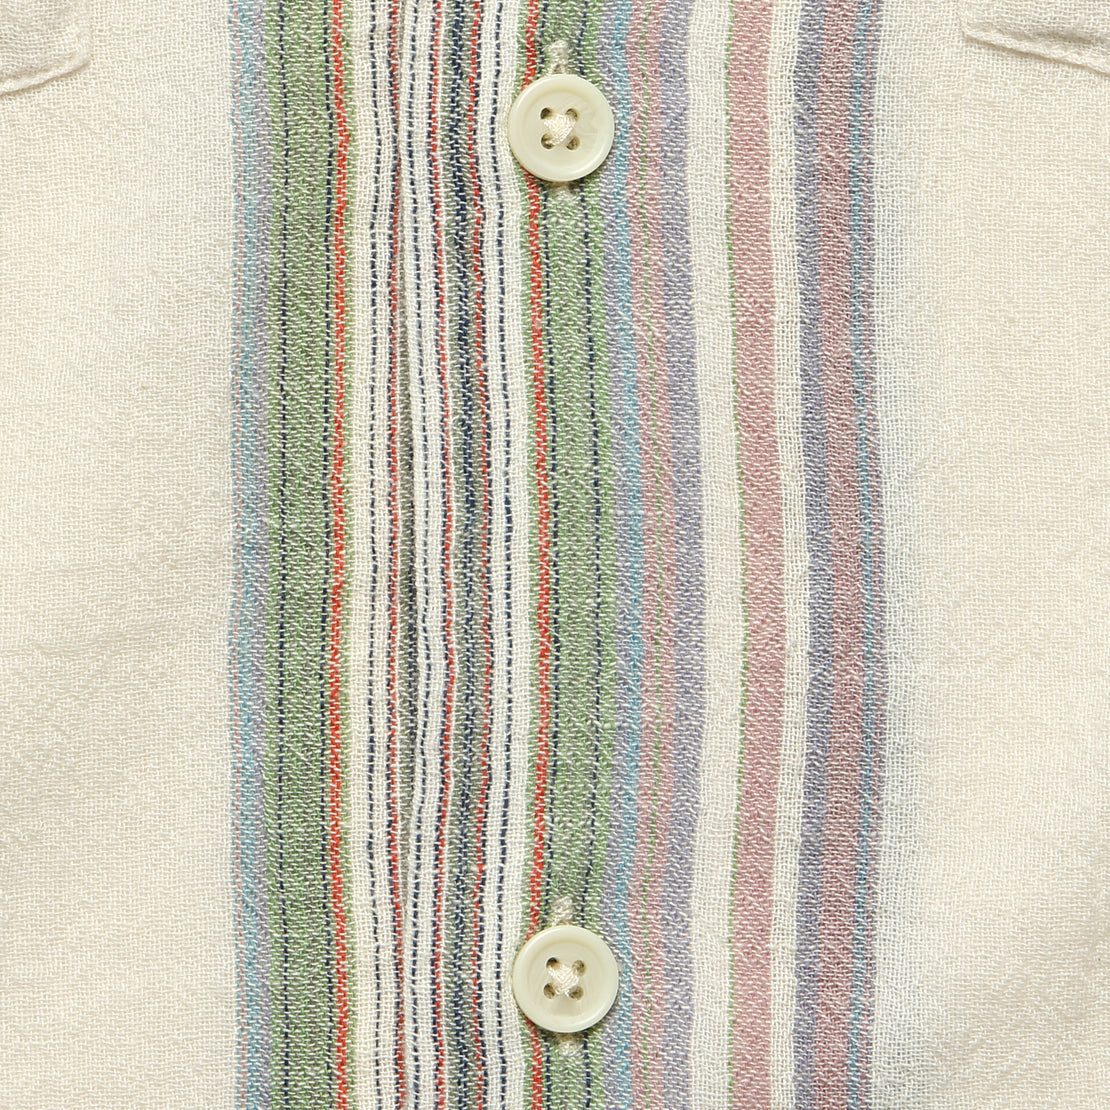 Riis Camp Shirt - Natural - Corridor - STAG Provisions - Tops - S/S Woven - Stripe